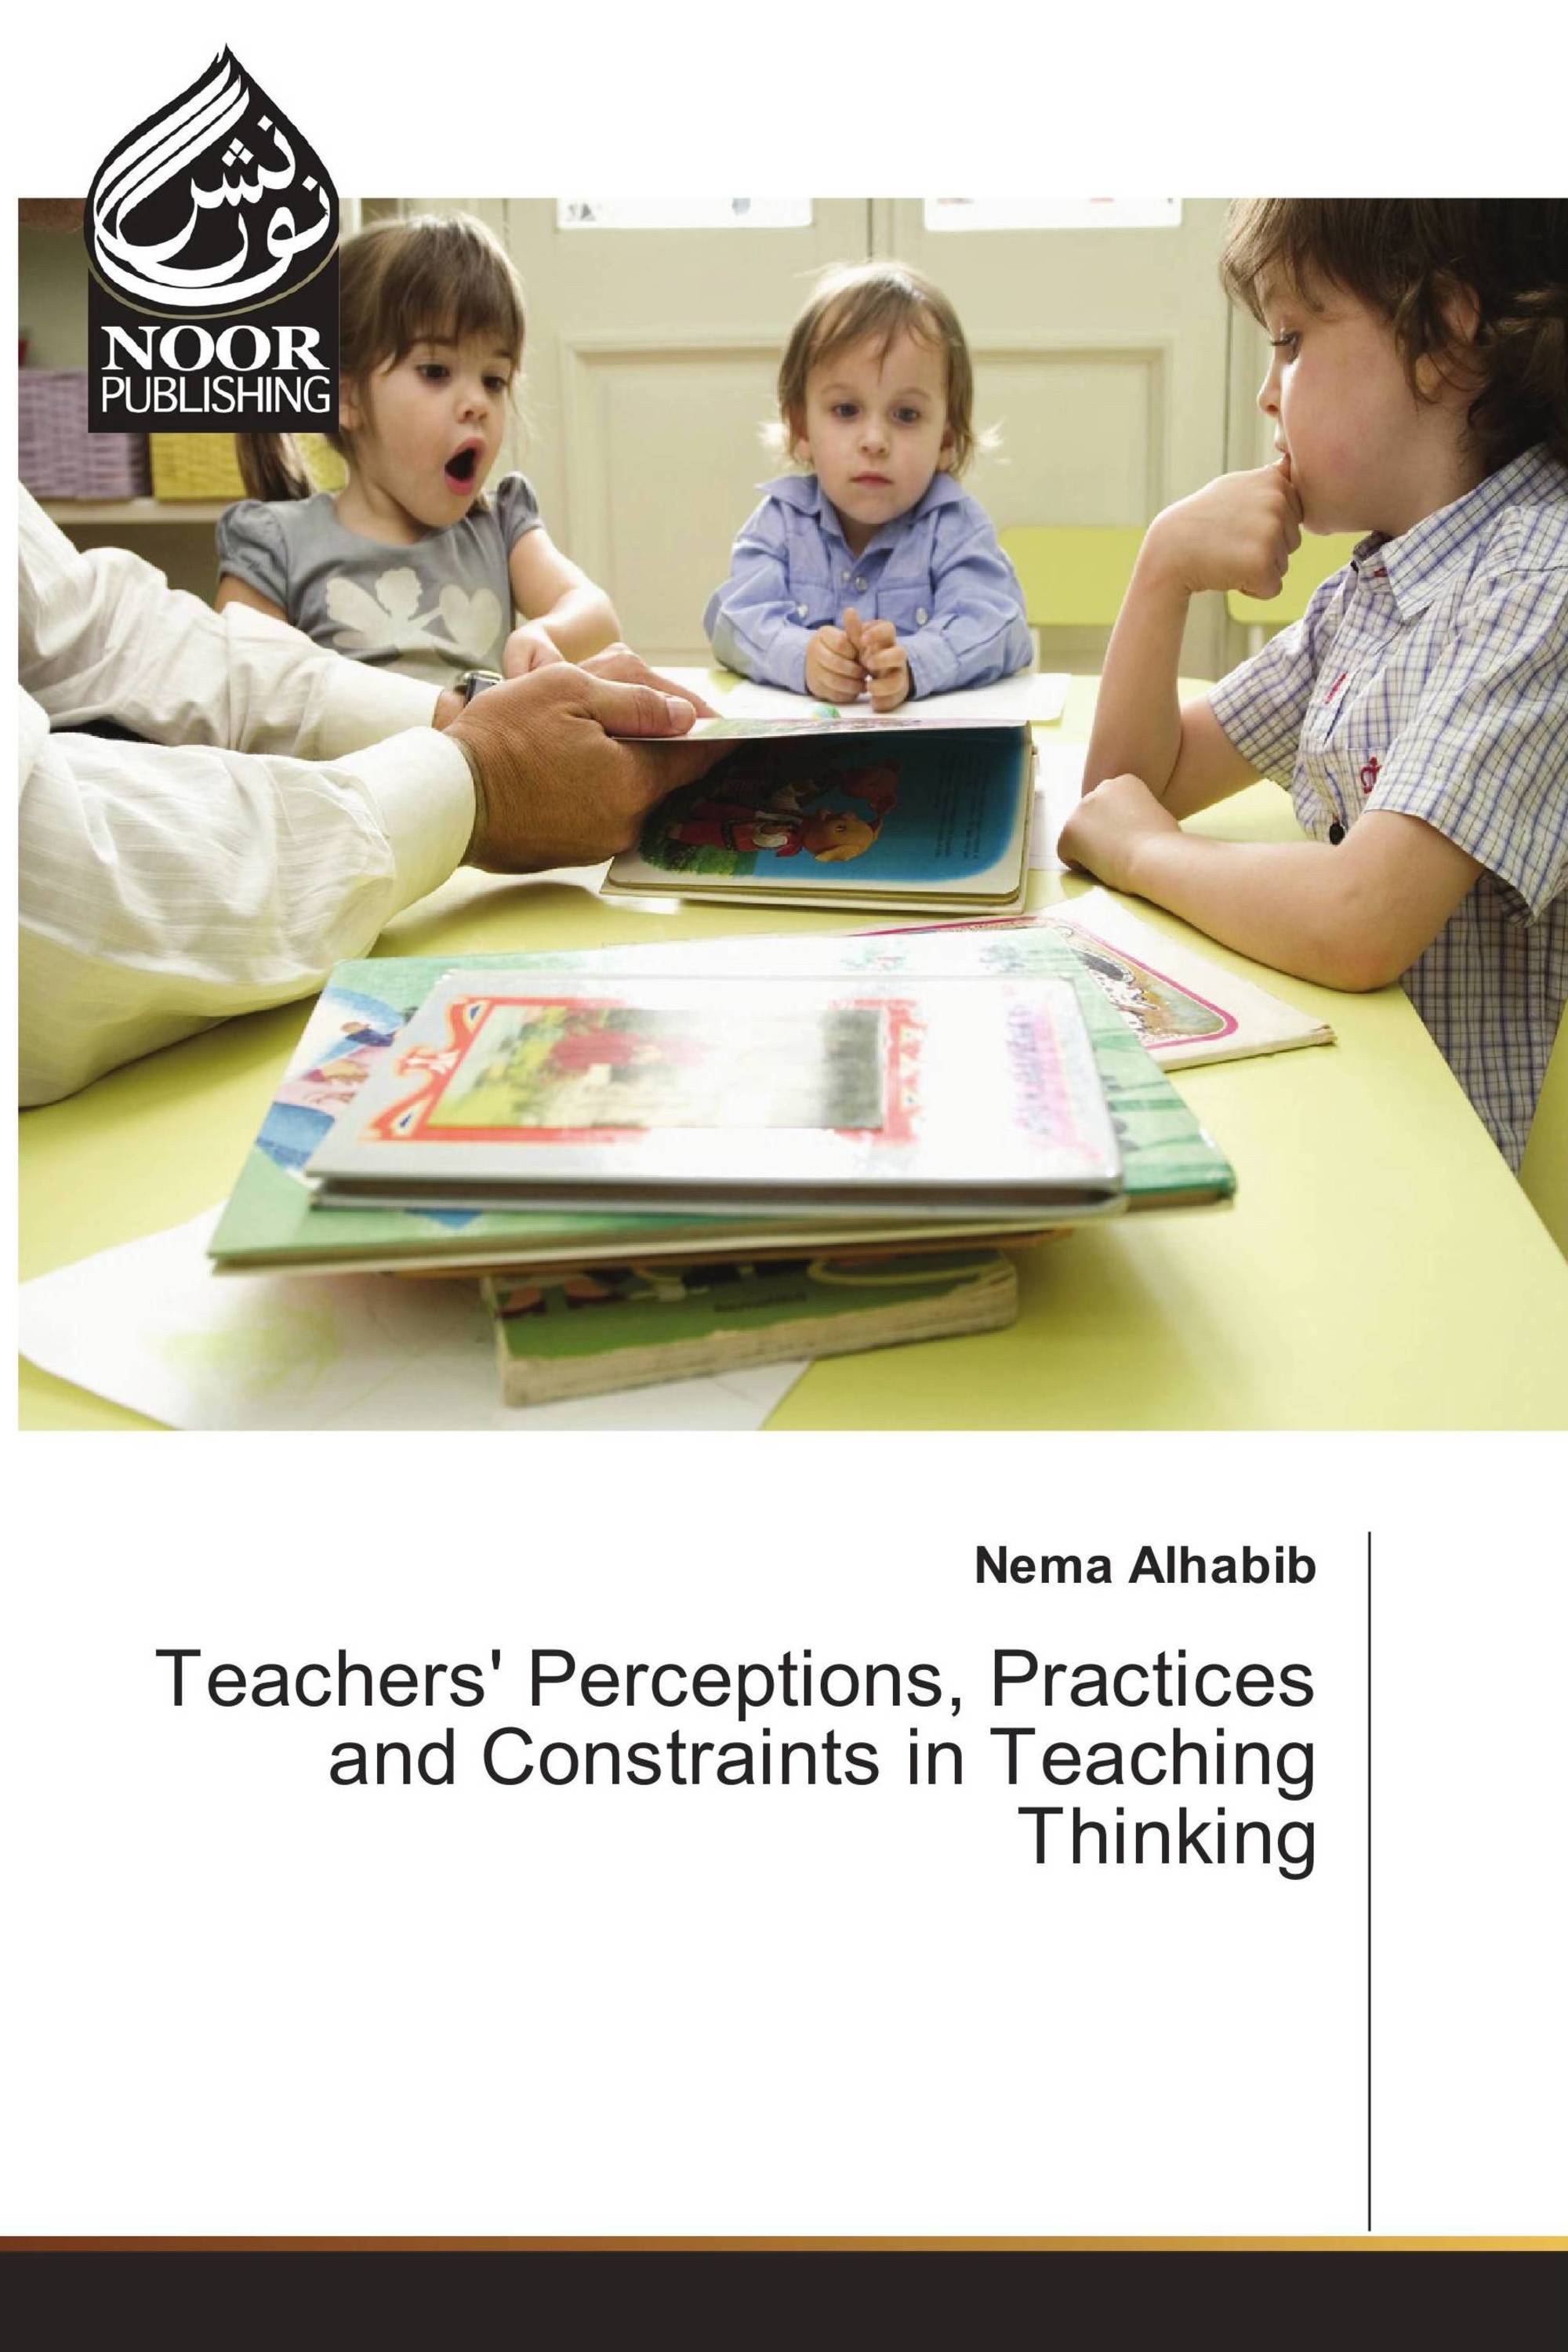 Teachers' Perceptions, Practices and Constraints in Teaching Thinking